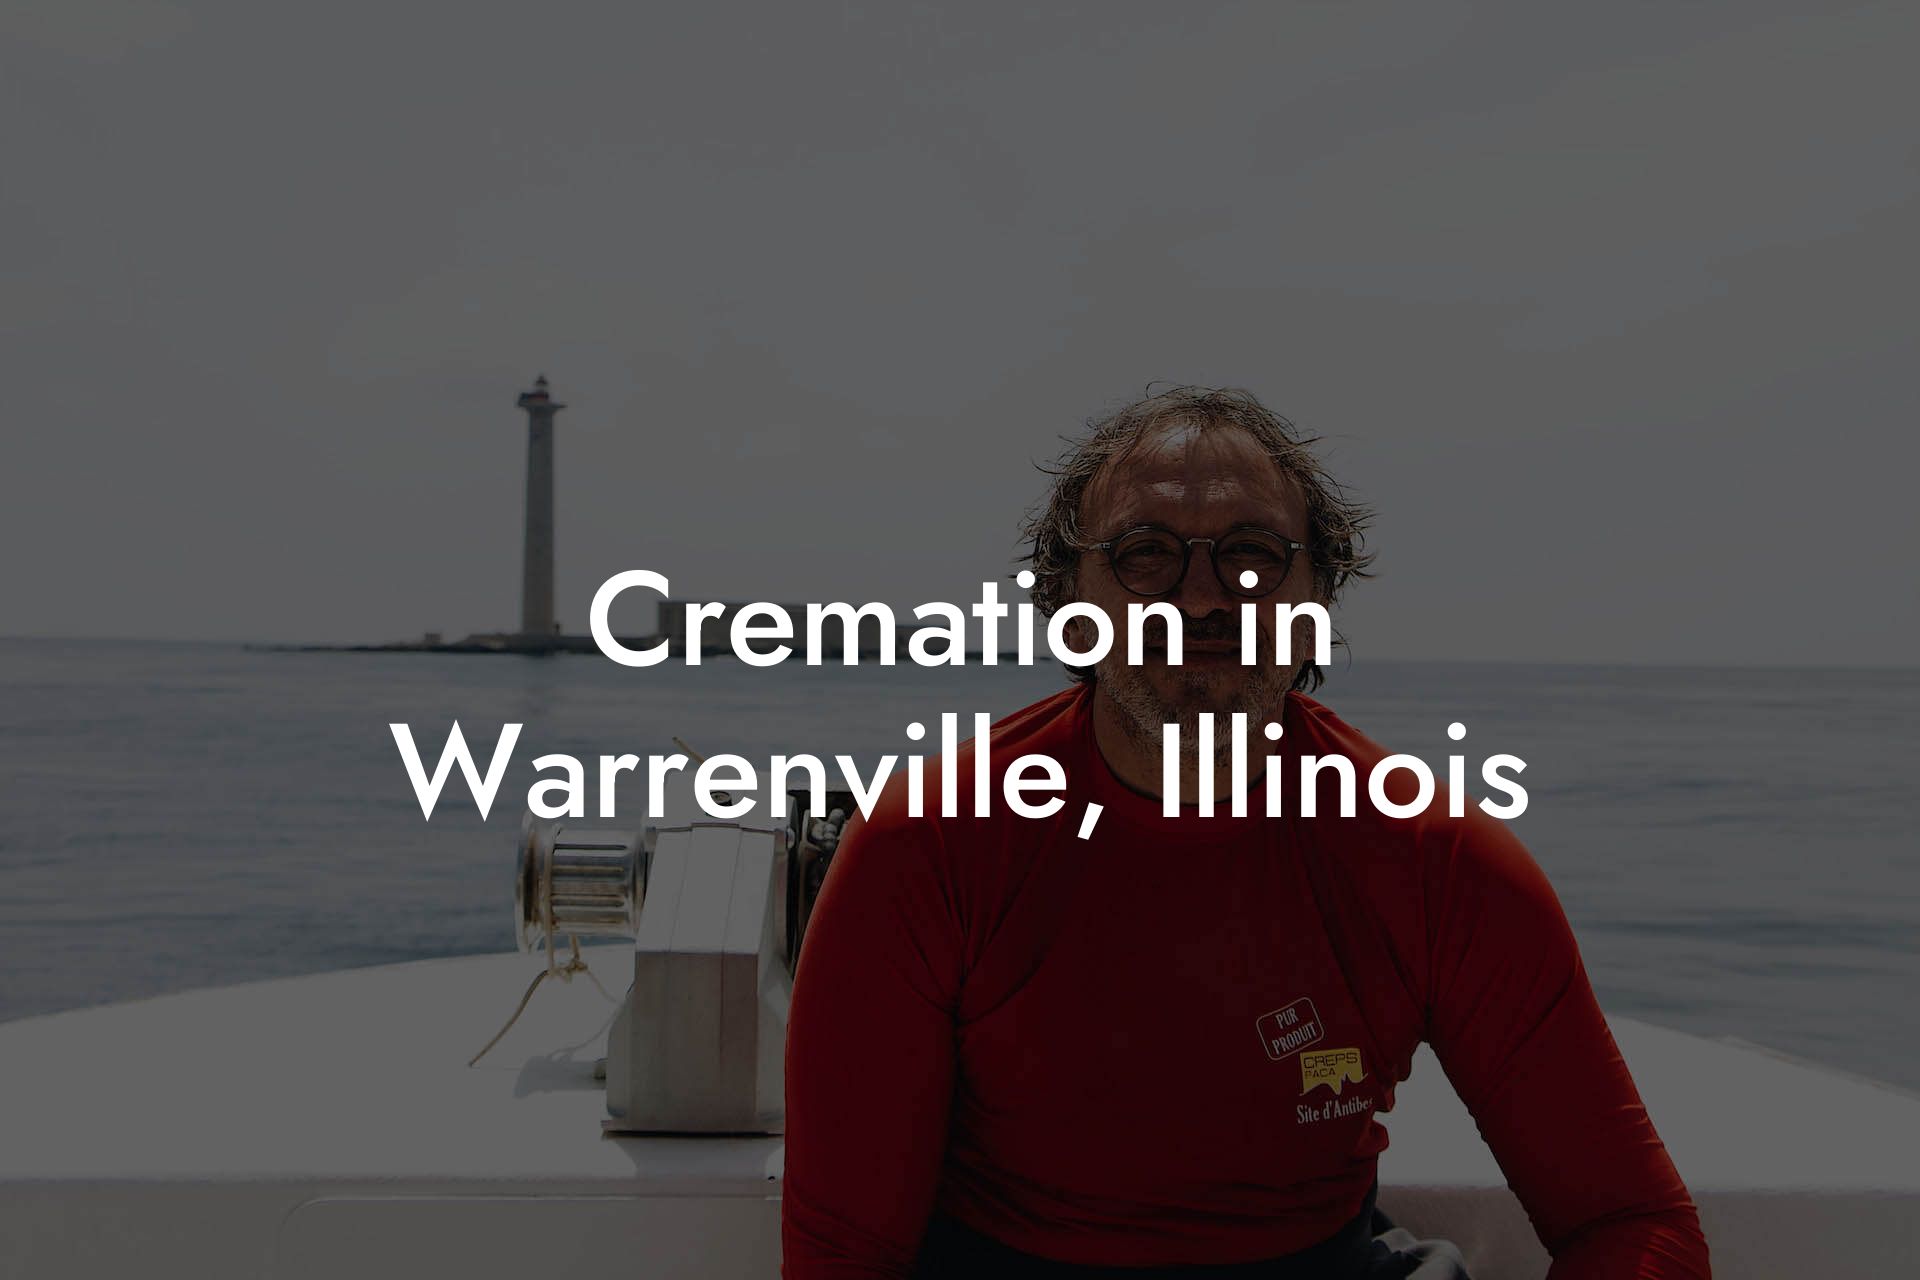 Cremation in Warrenville, Illinois